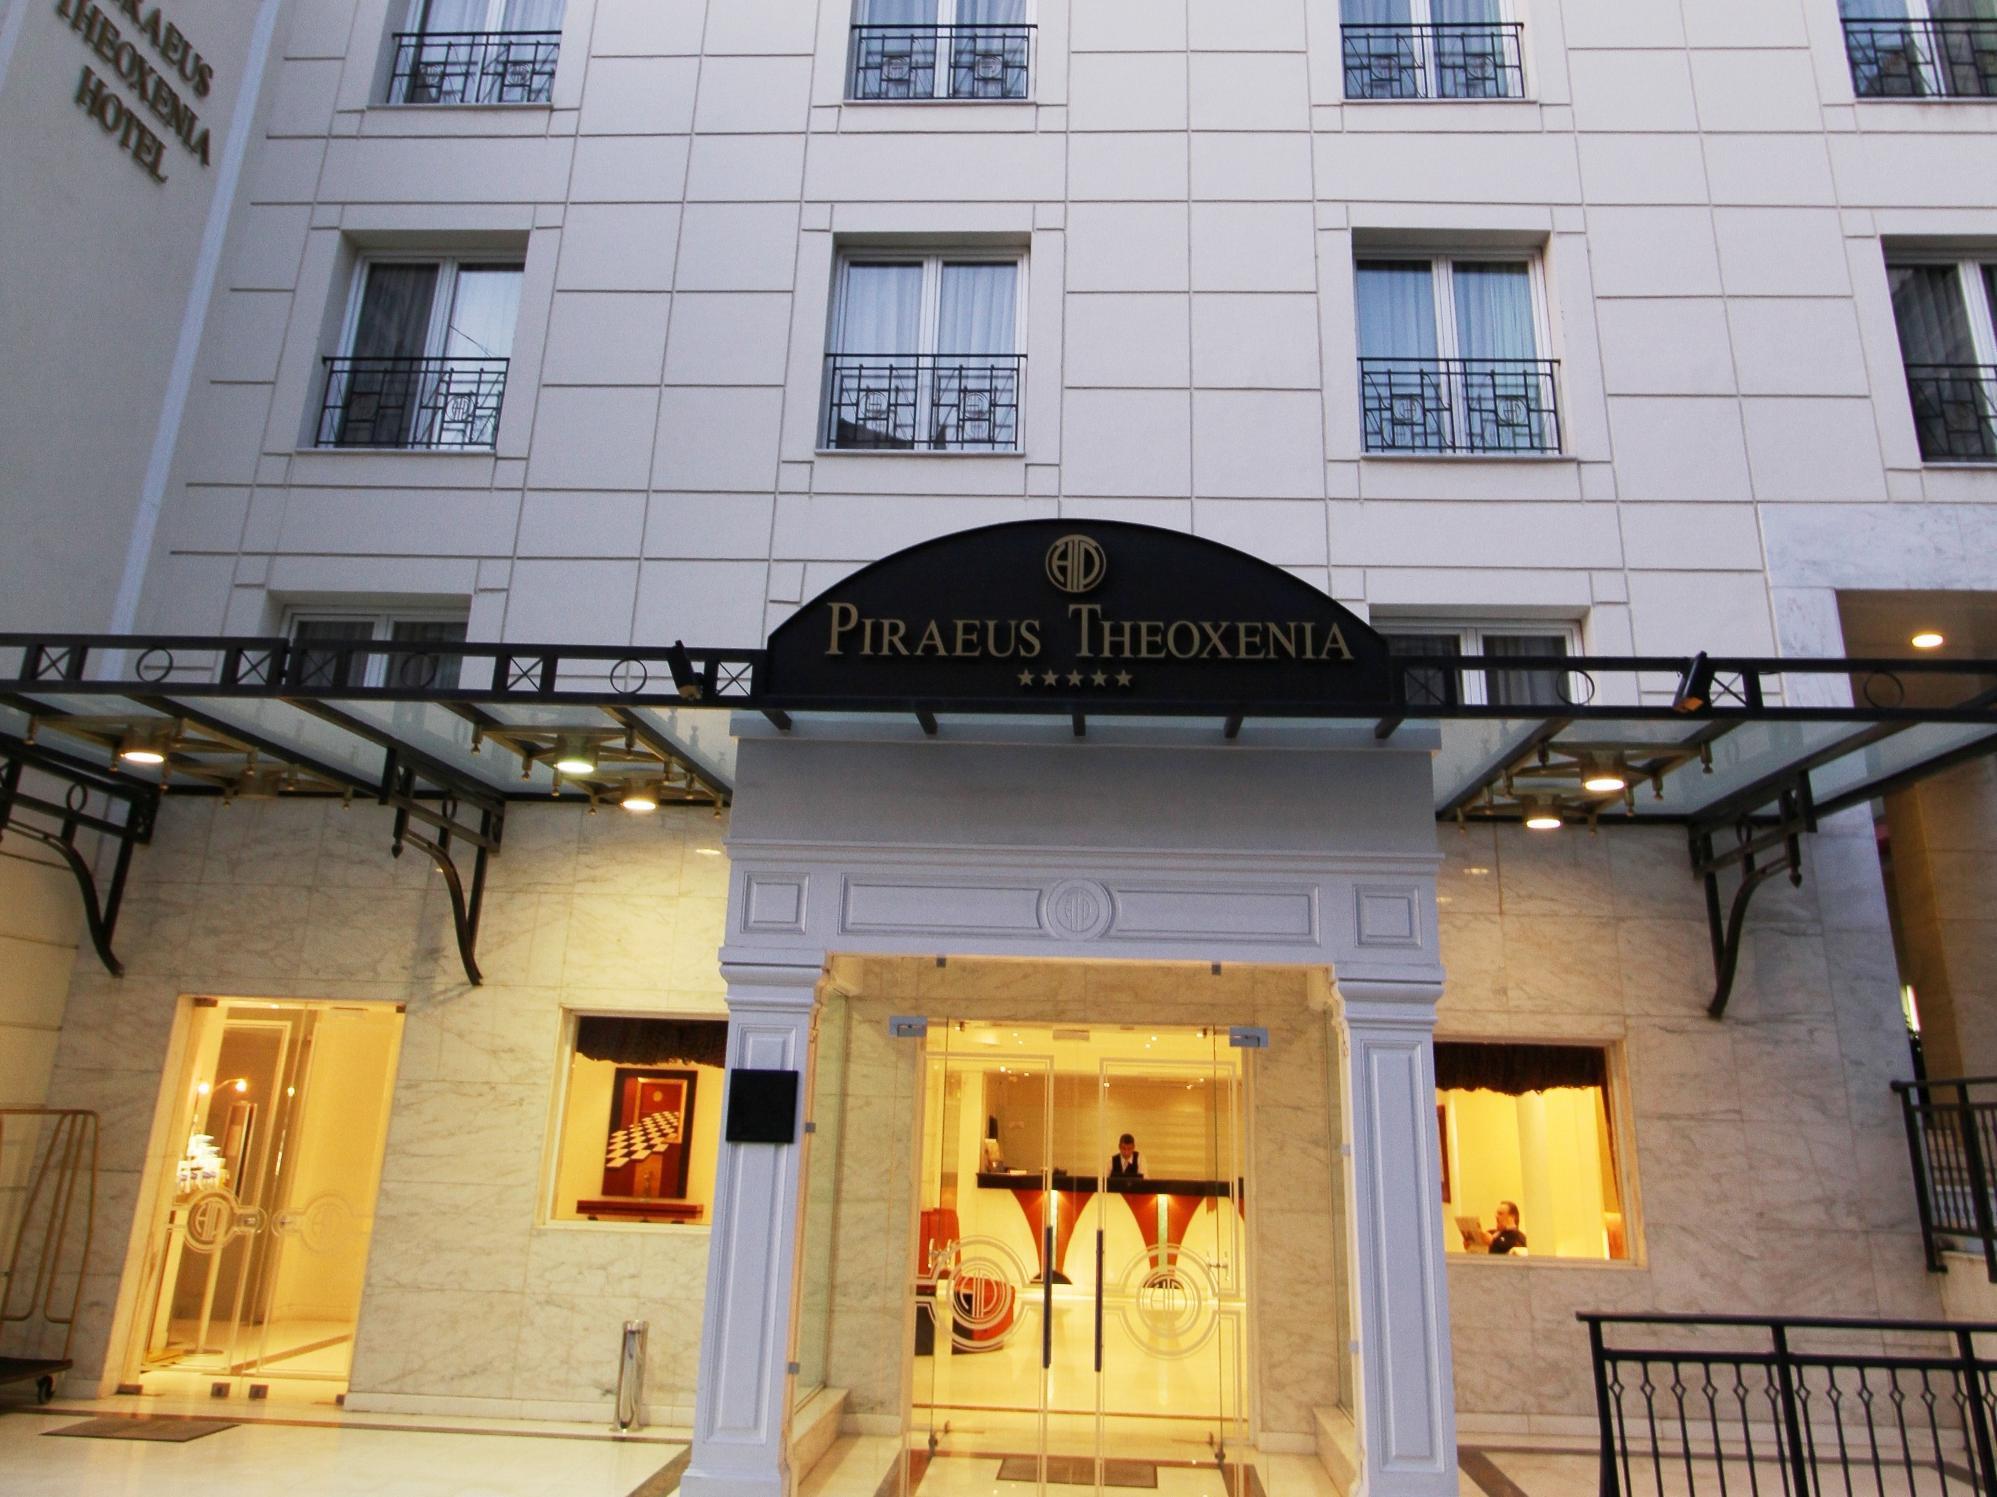 Piraeus Theoxenia Hotel Athens FAQ 2017, What facilities are there in Piraeus Theoxenia Hotel Athens 2017, What Languages Spoken are Supported in Piraeus Theoxenia Hotel Athens 2017, Which payment cards are accepted in Piraeus Theoxenia Hotel Athens , Athens Piraeus Theoxenia Hotel room facilities and services Q&A 2017, Athens Piraeus Theoxenia Hotel online booking services 2017, Athens Piraeus Theoxenia Hotel address 2017, Athens Piraeus Theoxenia Hotel telephone number 2017,Athens Piraeus Theoxenia Hotel map 2017, Athens Piraeus Theoxenia Hotel traffic guide 2017, how to go Athens Piraeus Theoxenia Hotel, Athens Piraeus Theoxenia Hotel booking online 2017, Athens Piraeus Theoxenia Hotel room types 2017.